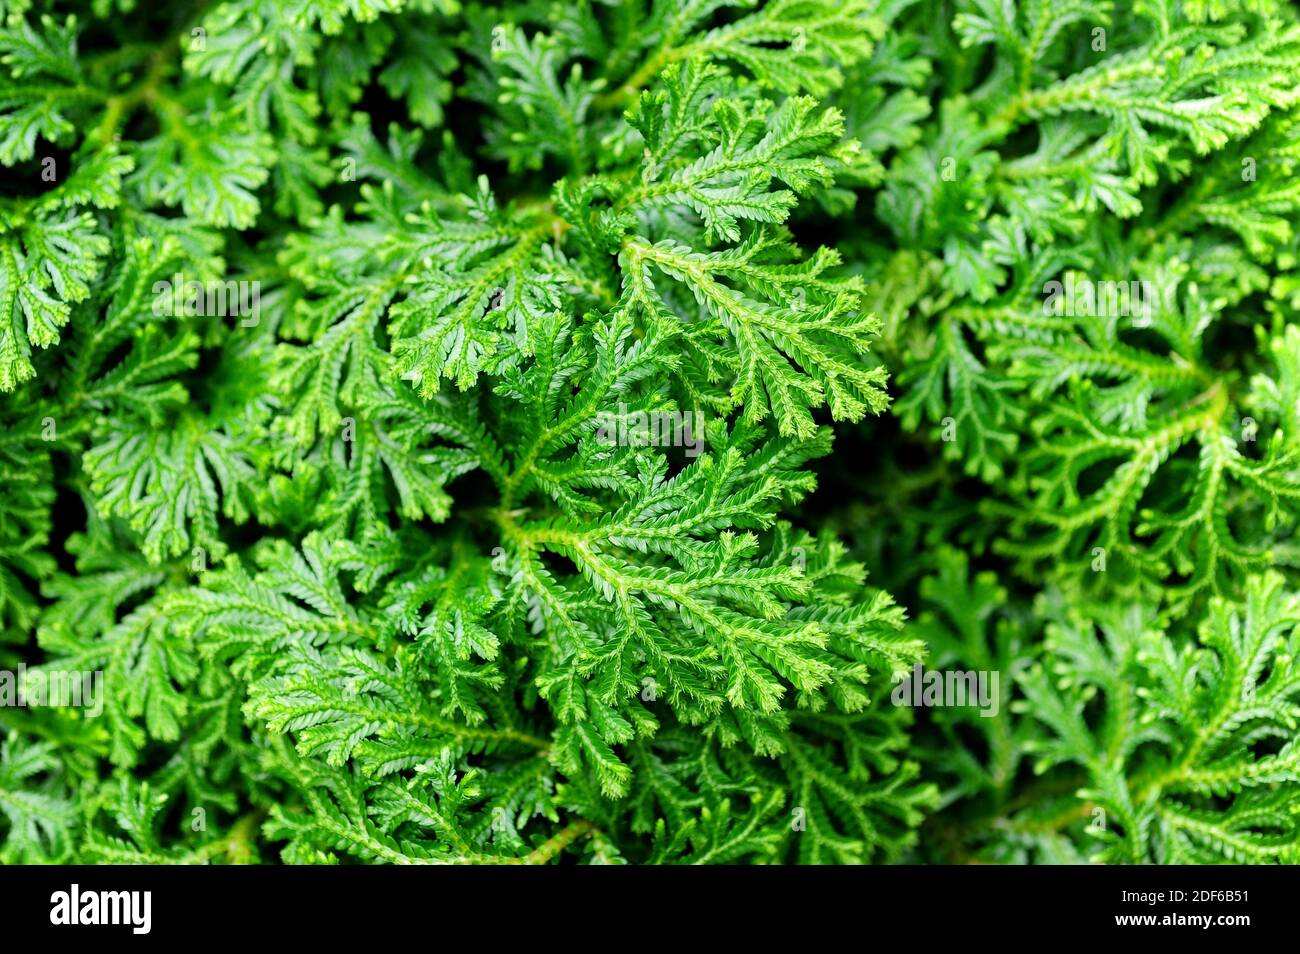 Martens spikemoss or variegated spikemoss (Selaginella martensii) is a lycophyte native to Mexico and Central America. It is grown as an ornamental Stock Photo